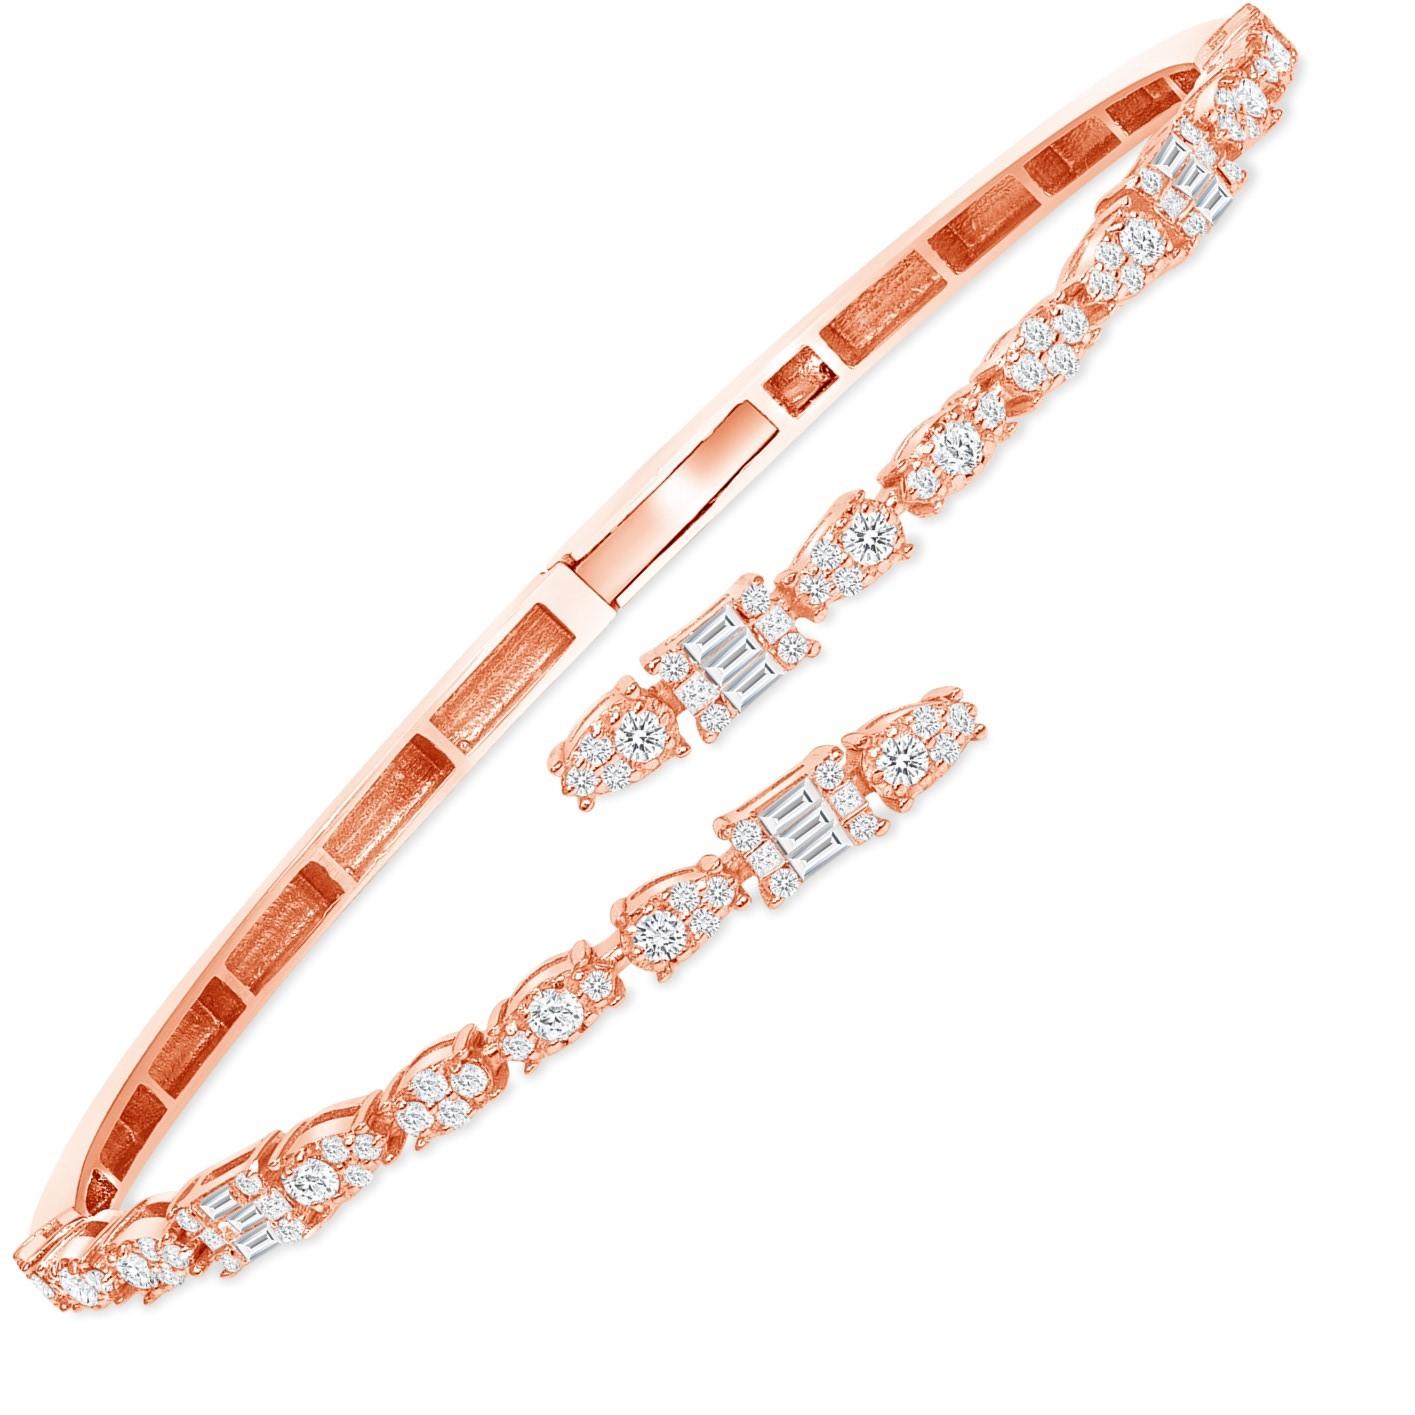 1.0 tcw 18K Rose Gold Cuff Diamond Bangle, Wrap Diamond Bangle, Illusion Bangle

Wrap your wrist with this gorgeous diamond-lined bracelet that sparkles when you move. The setting of round and princess cut diamonds are delicately put to have an